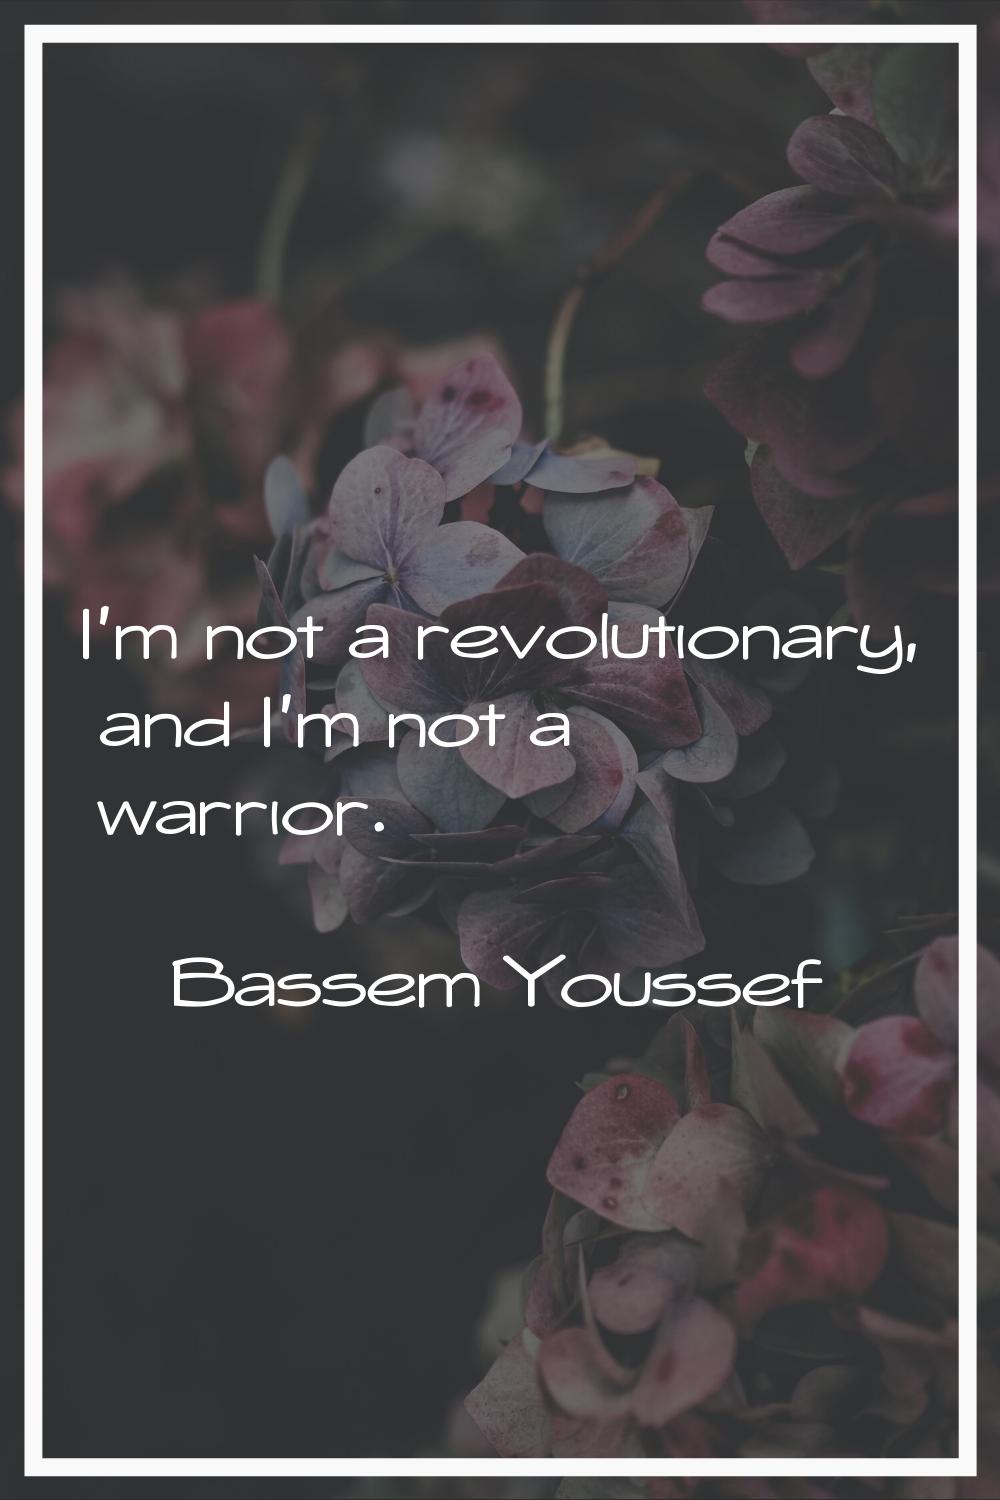 I'm not a revolutionary, and I'm not a warrior.